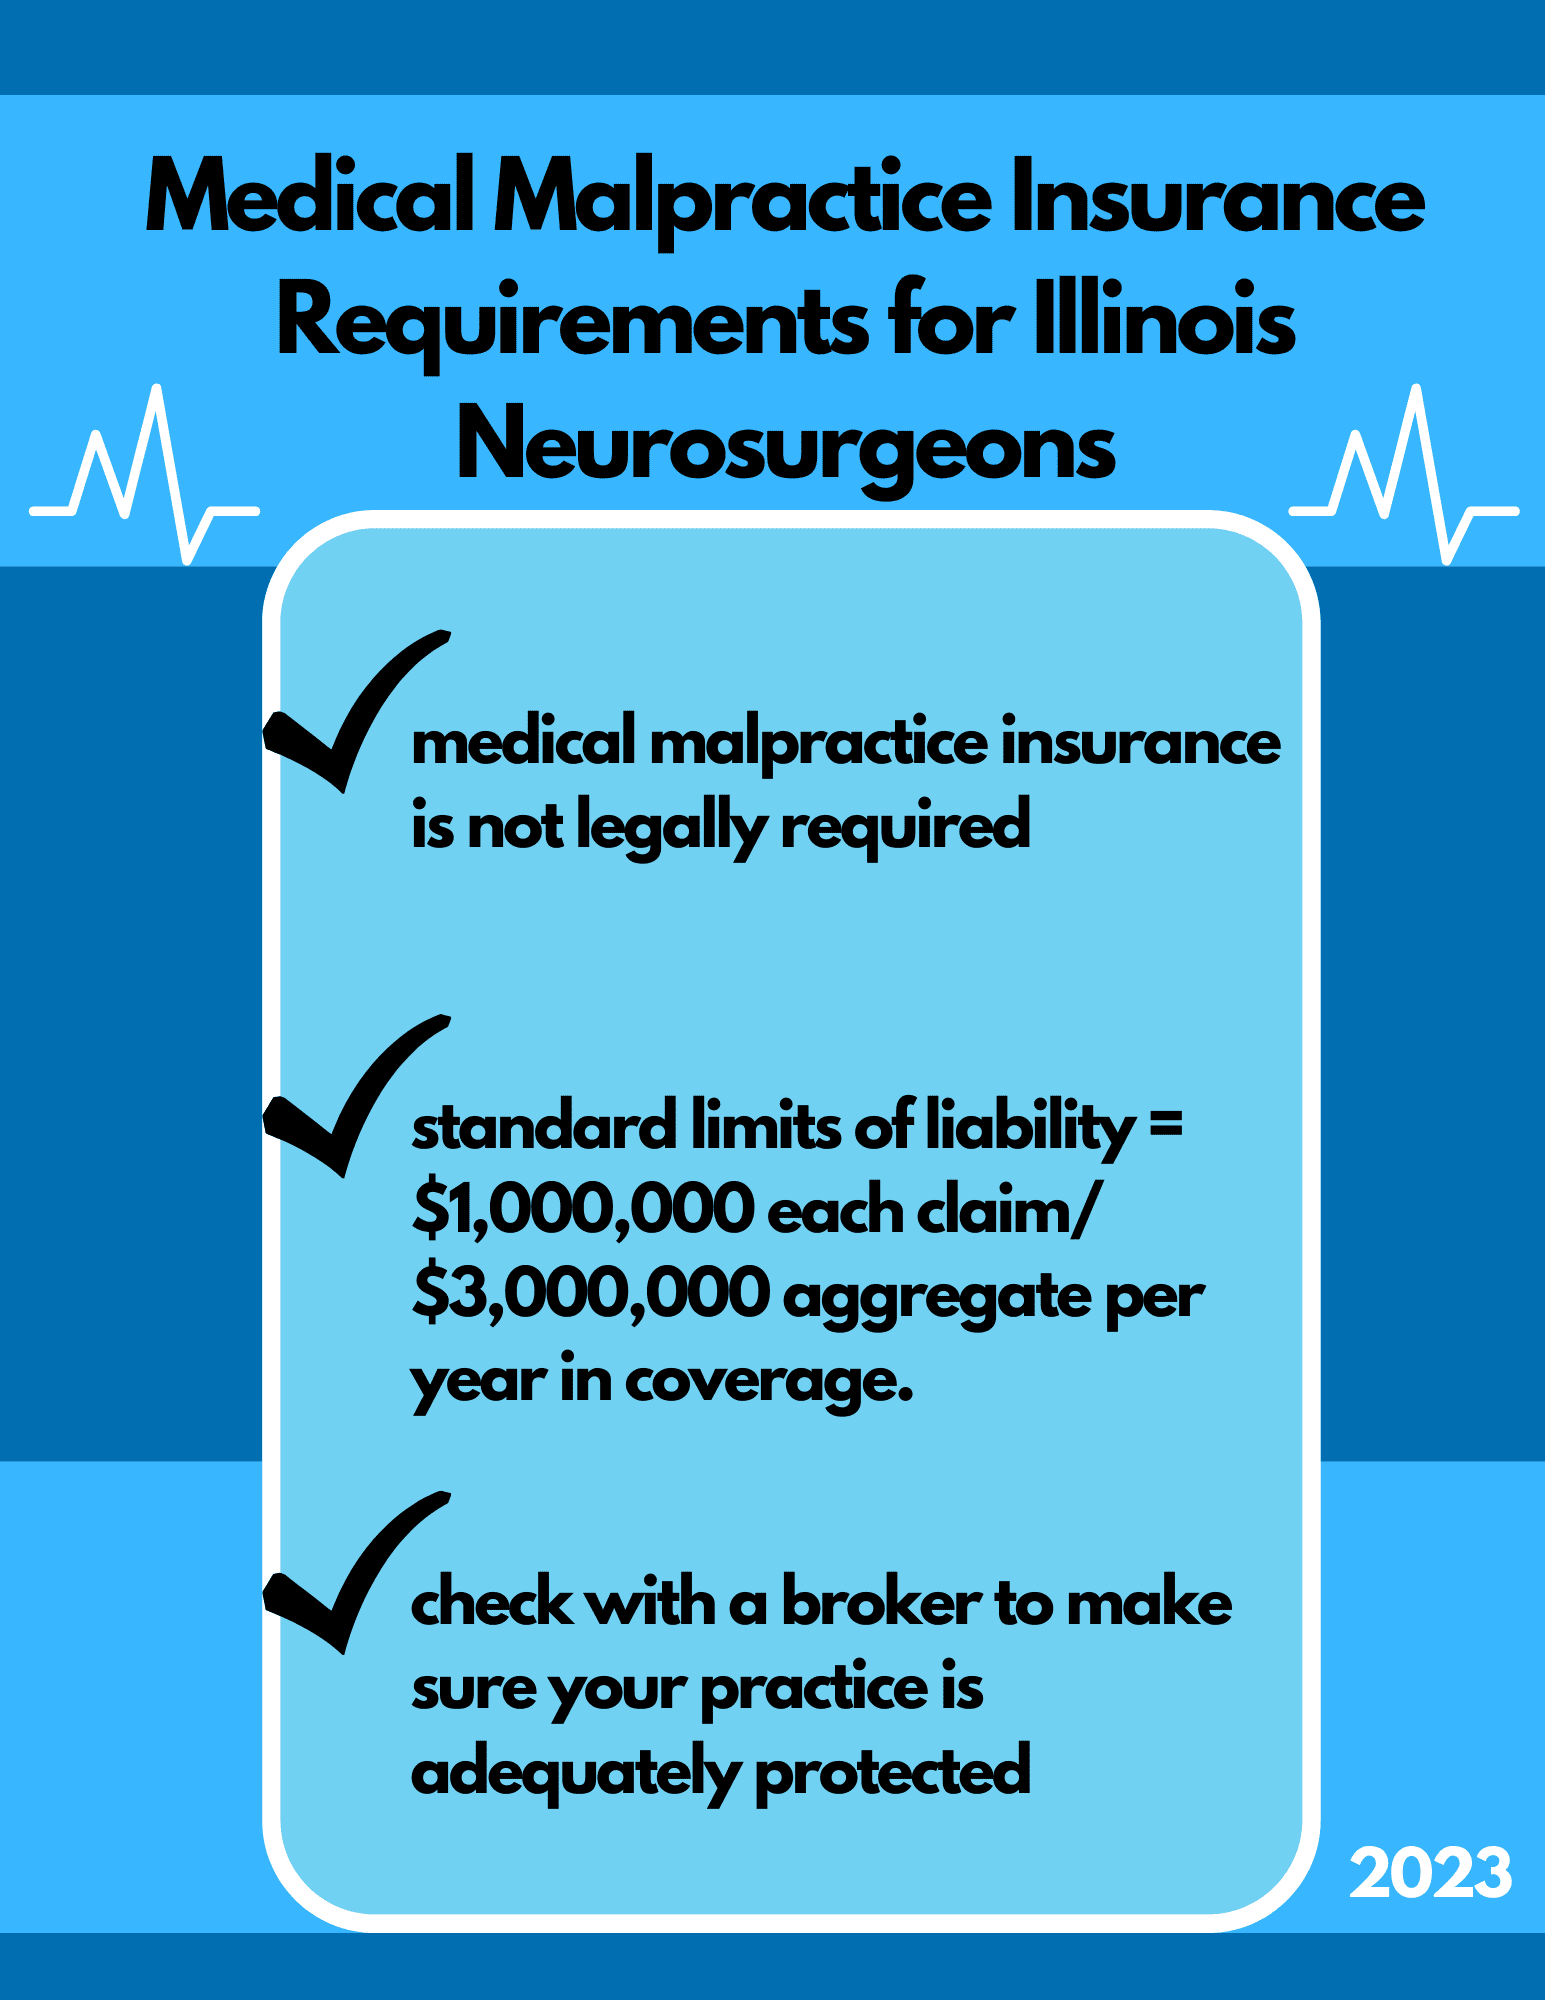 Medical malpractice insurance requirements for Illinois neurosurgeons